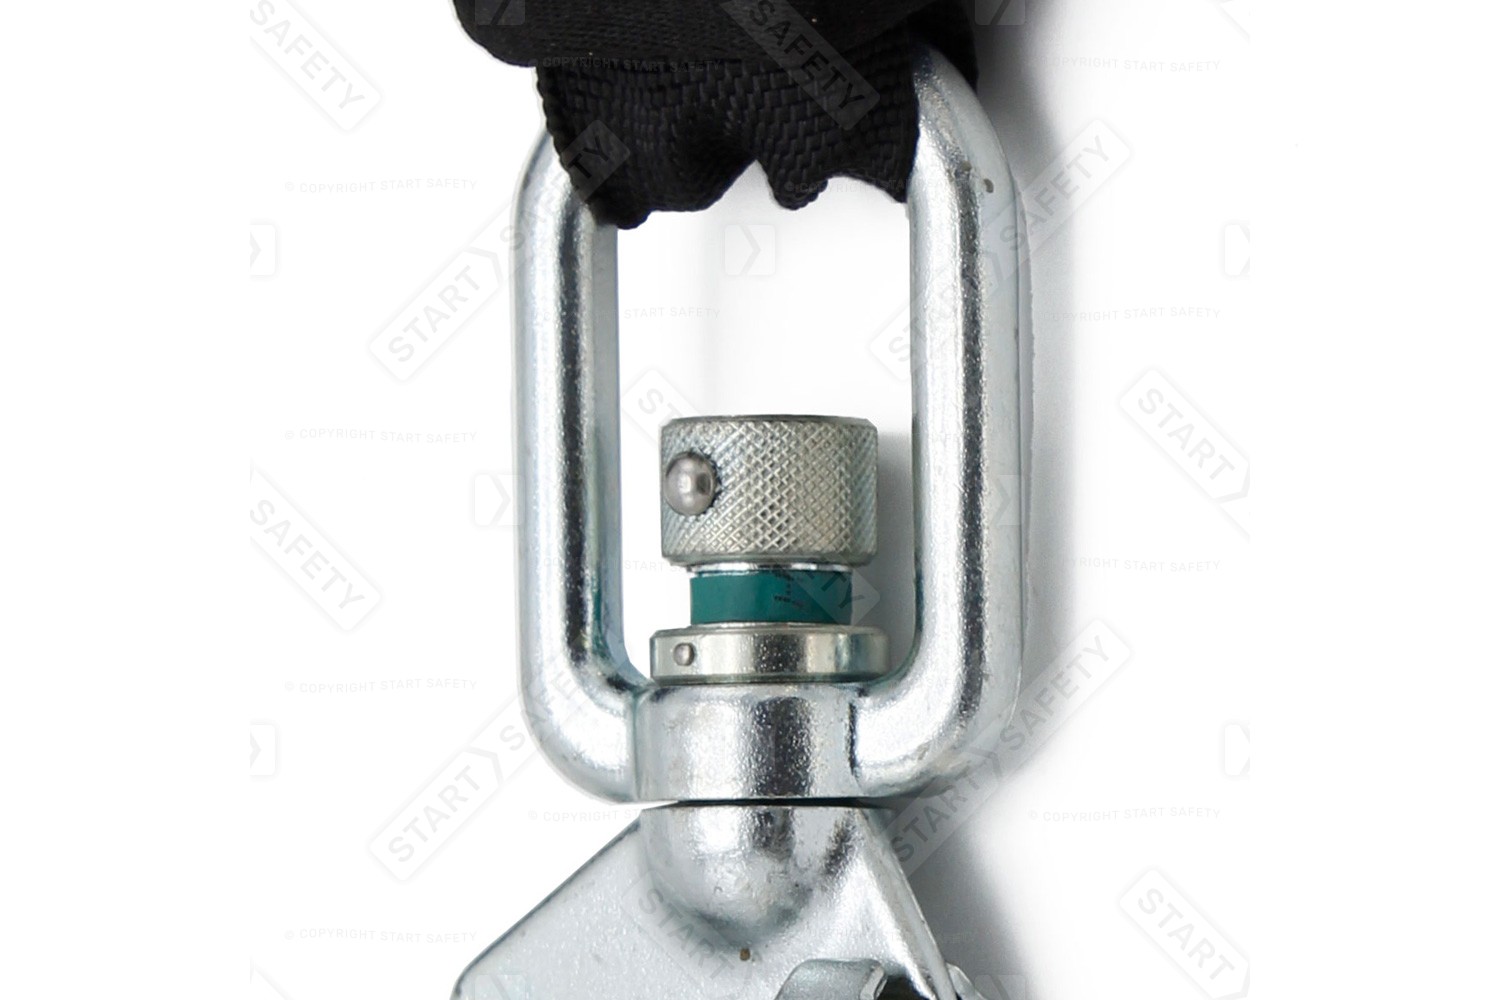 Fall Indicator On Snap Hook Of 5m Wire Retractable Lifeline